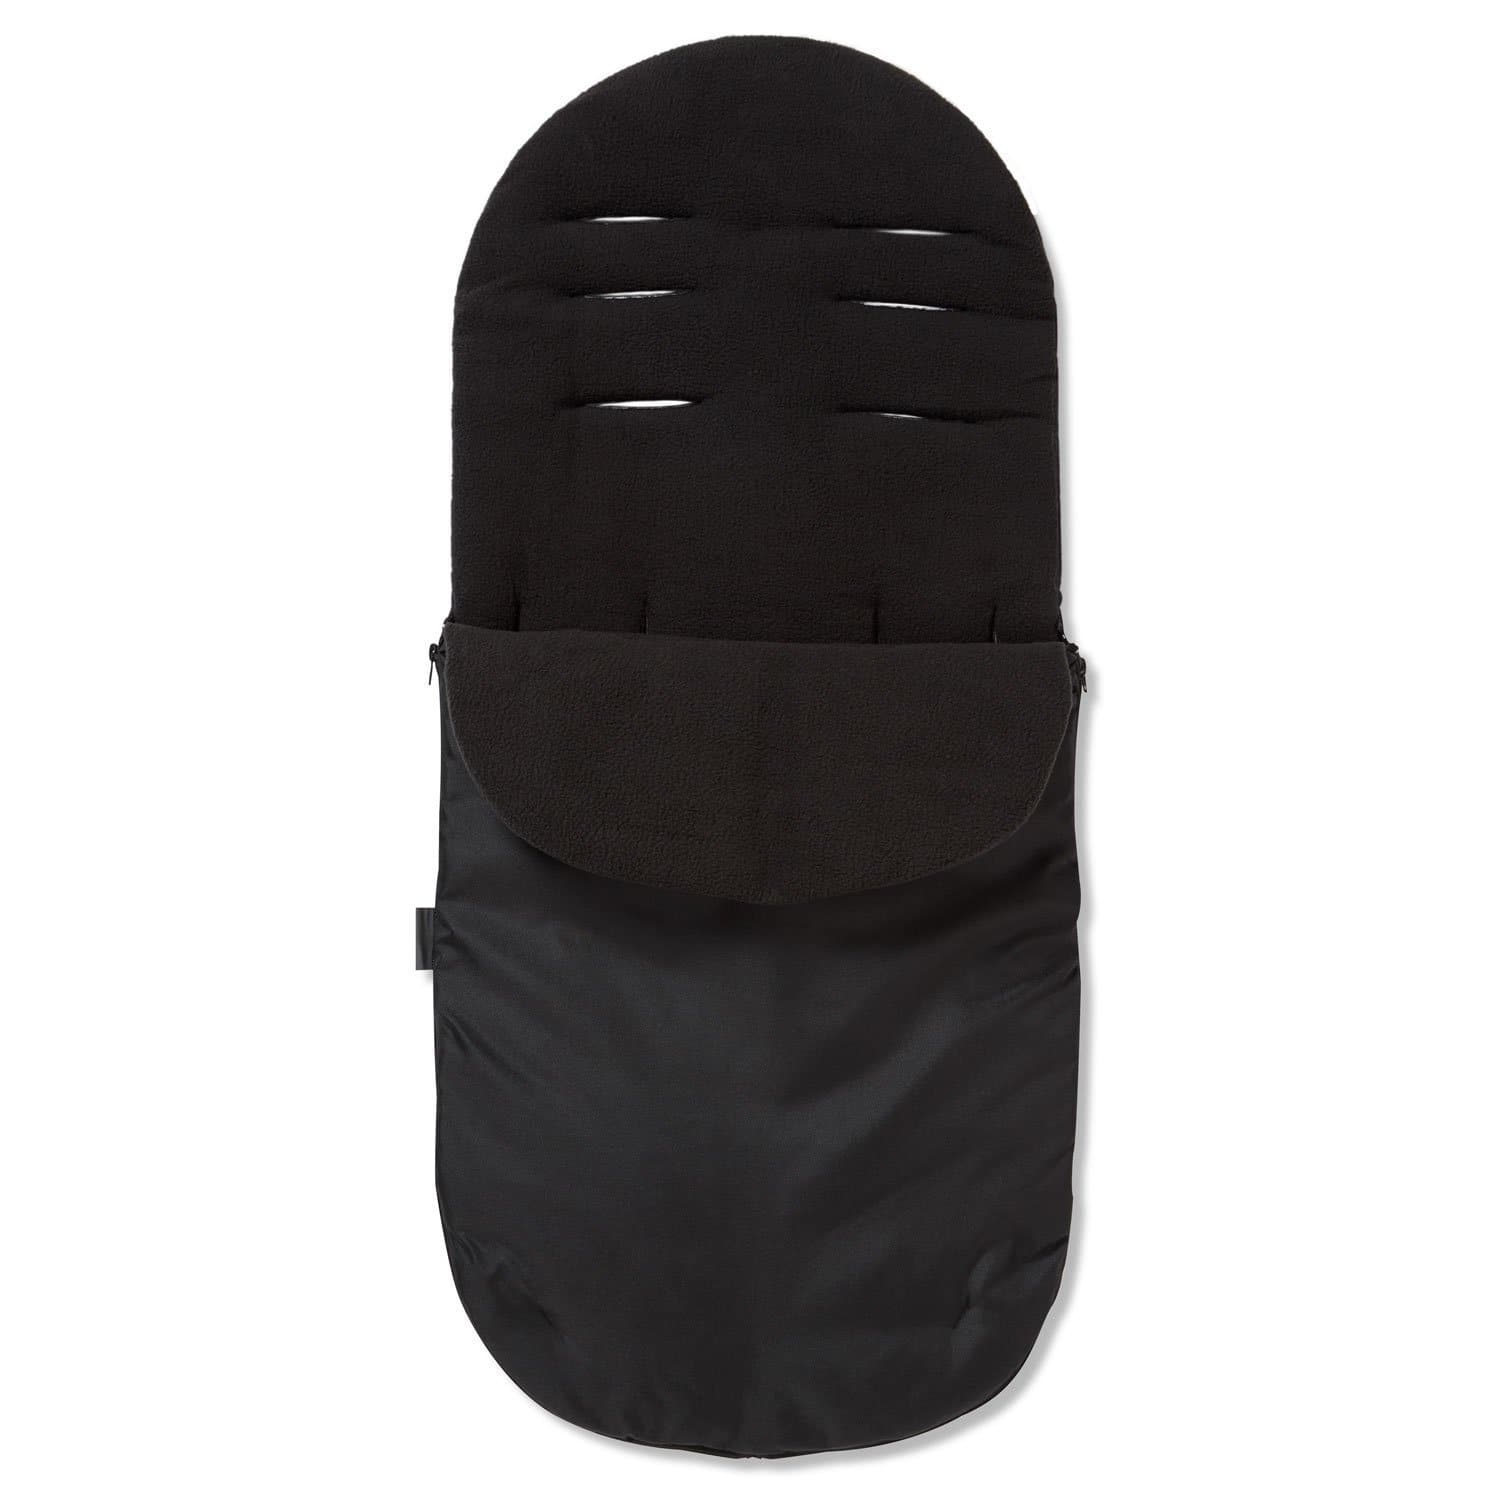 Footmuff / Cosy Toes Compatible with Peg Perego - Black / Fits All Models | For Your Little One